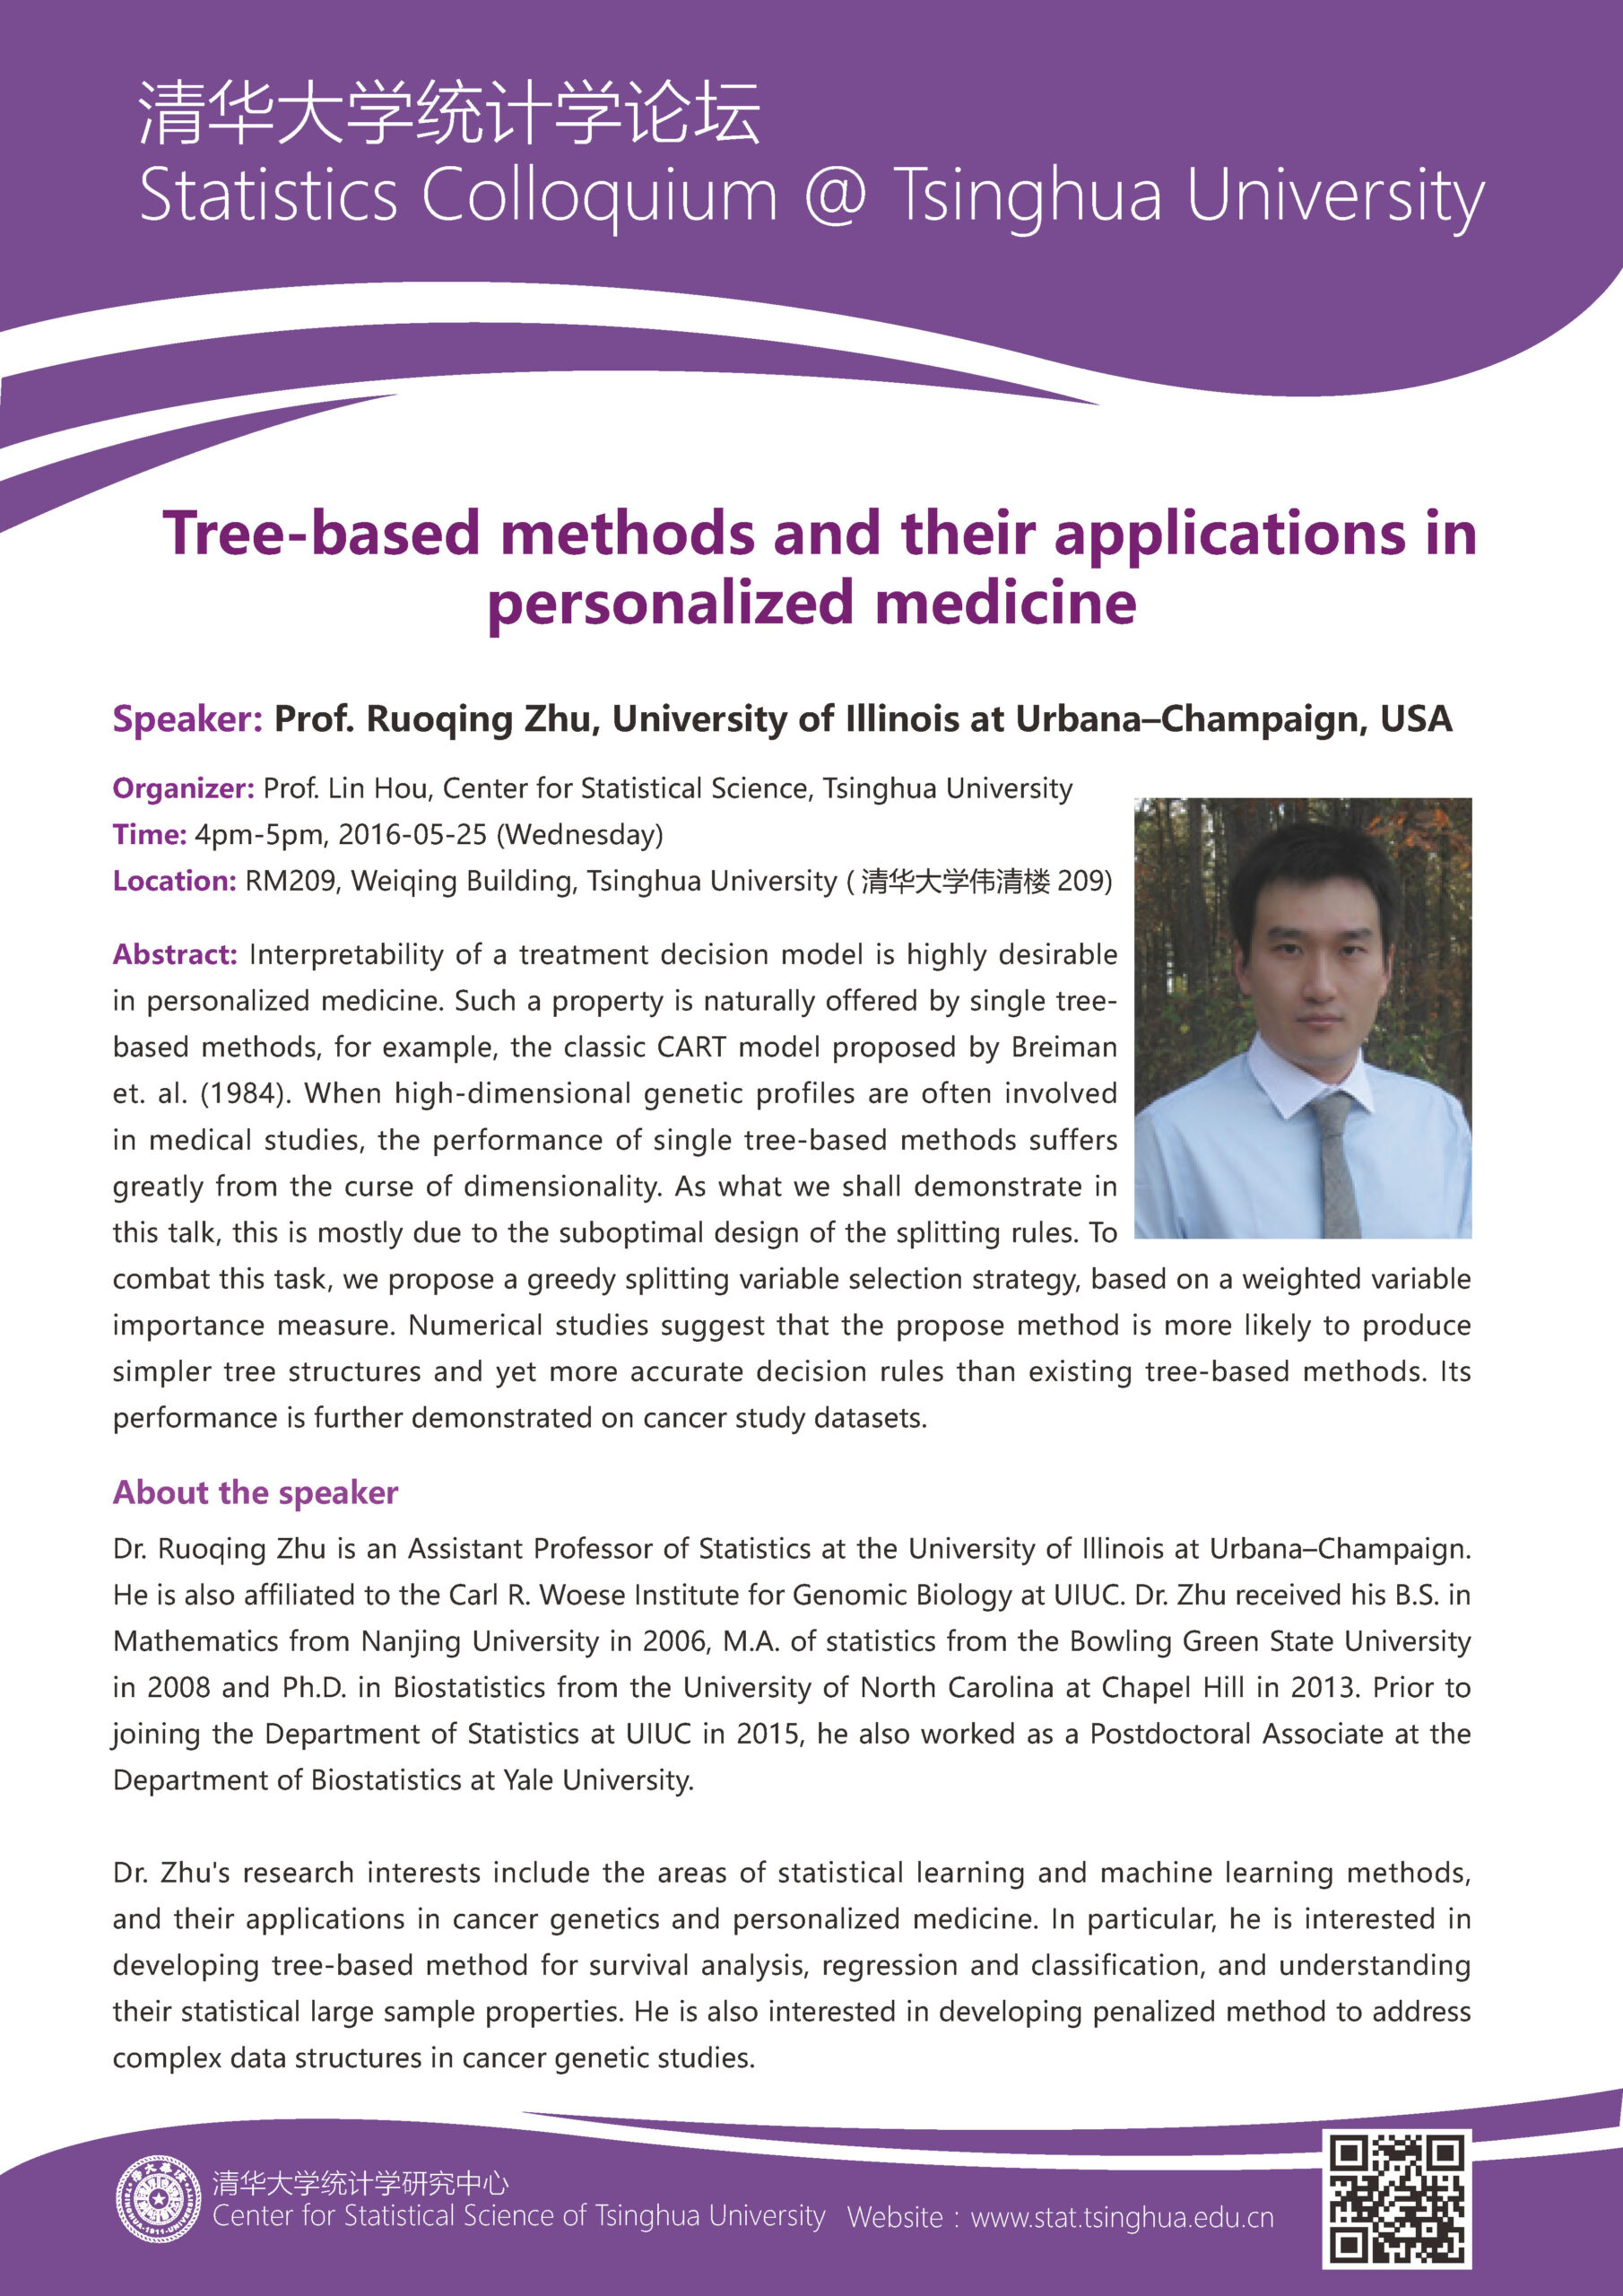 Tree-based Methods and Their Applications in Personalized Medicine